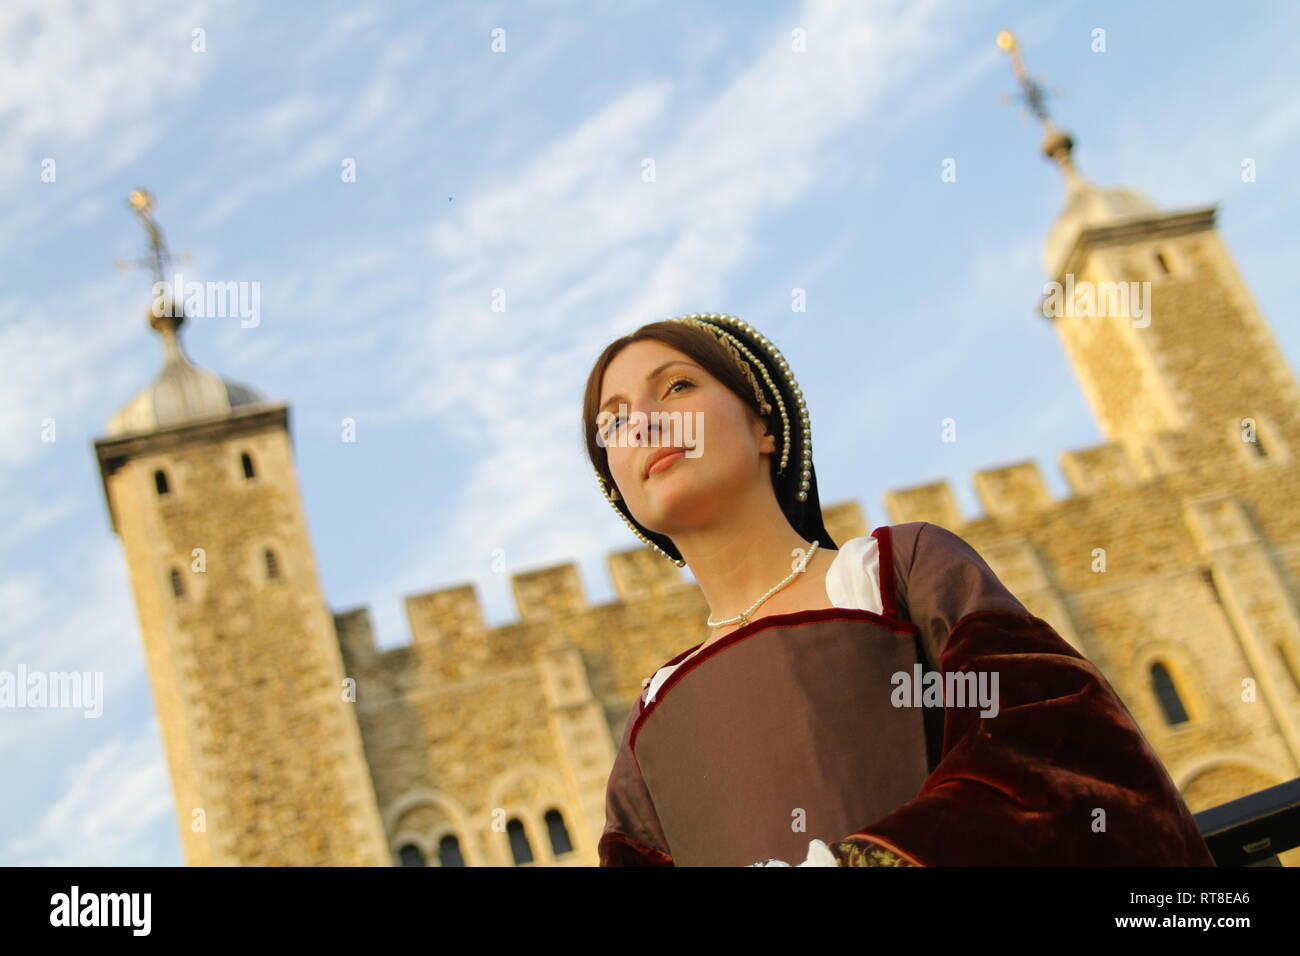 A woman dressed as Anne Boleyn stands in front of the Tower of London- she is a beautiful modern day woman in authentic dress Stock Photo